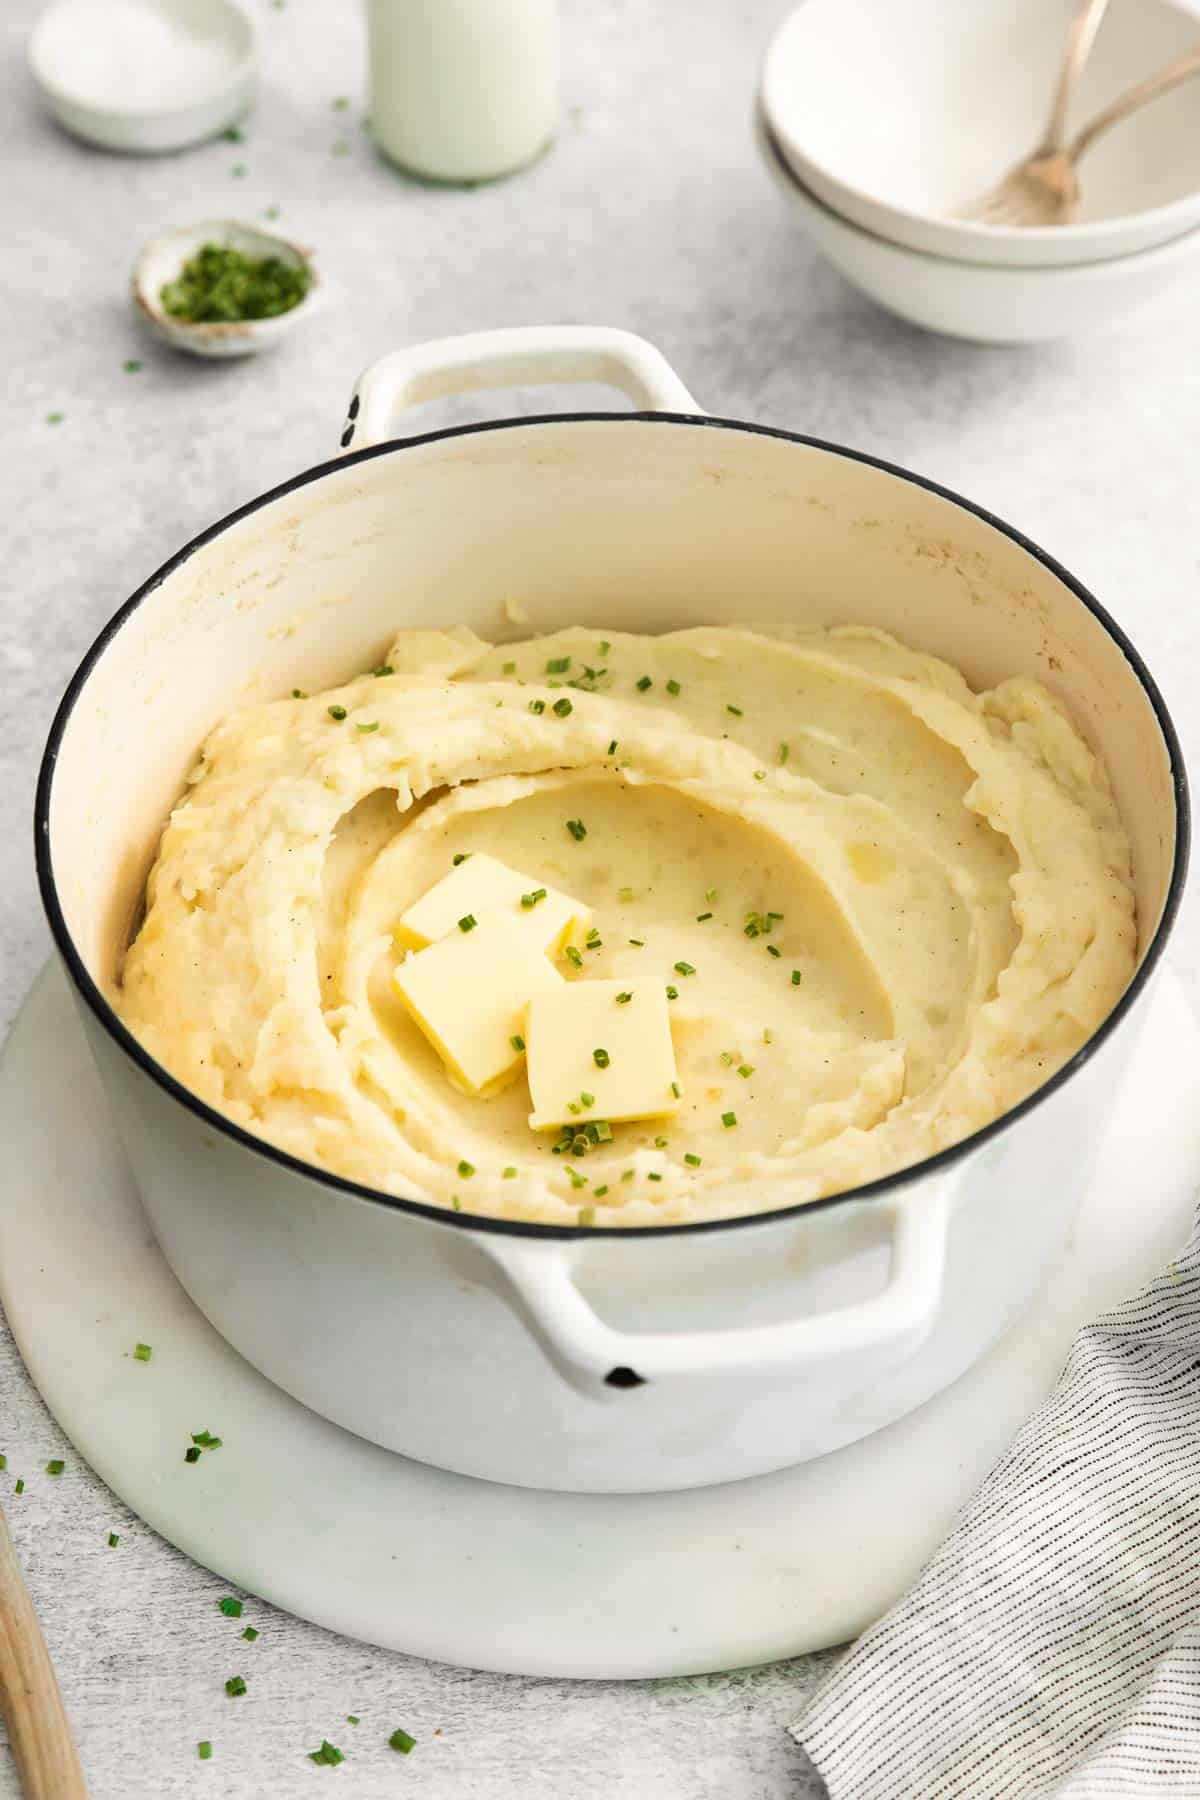 A large pot filled with gluten-free mashed potatoes